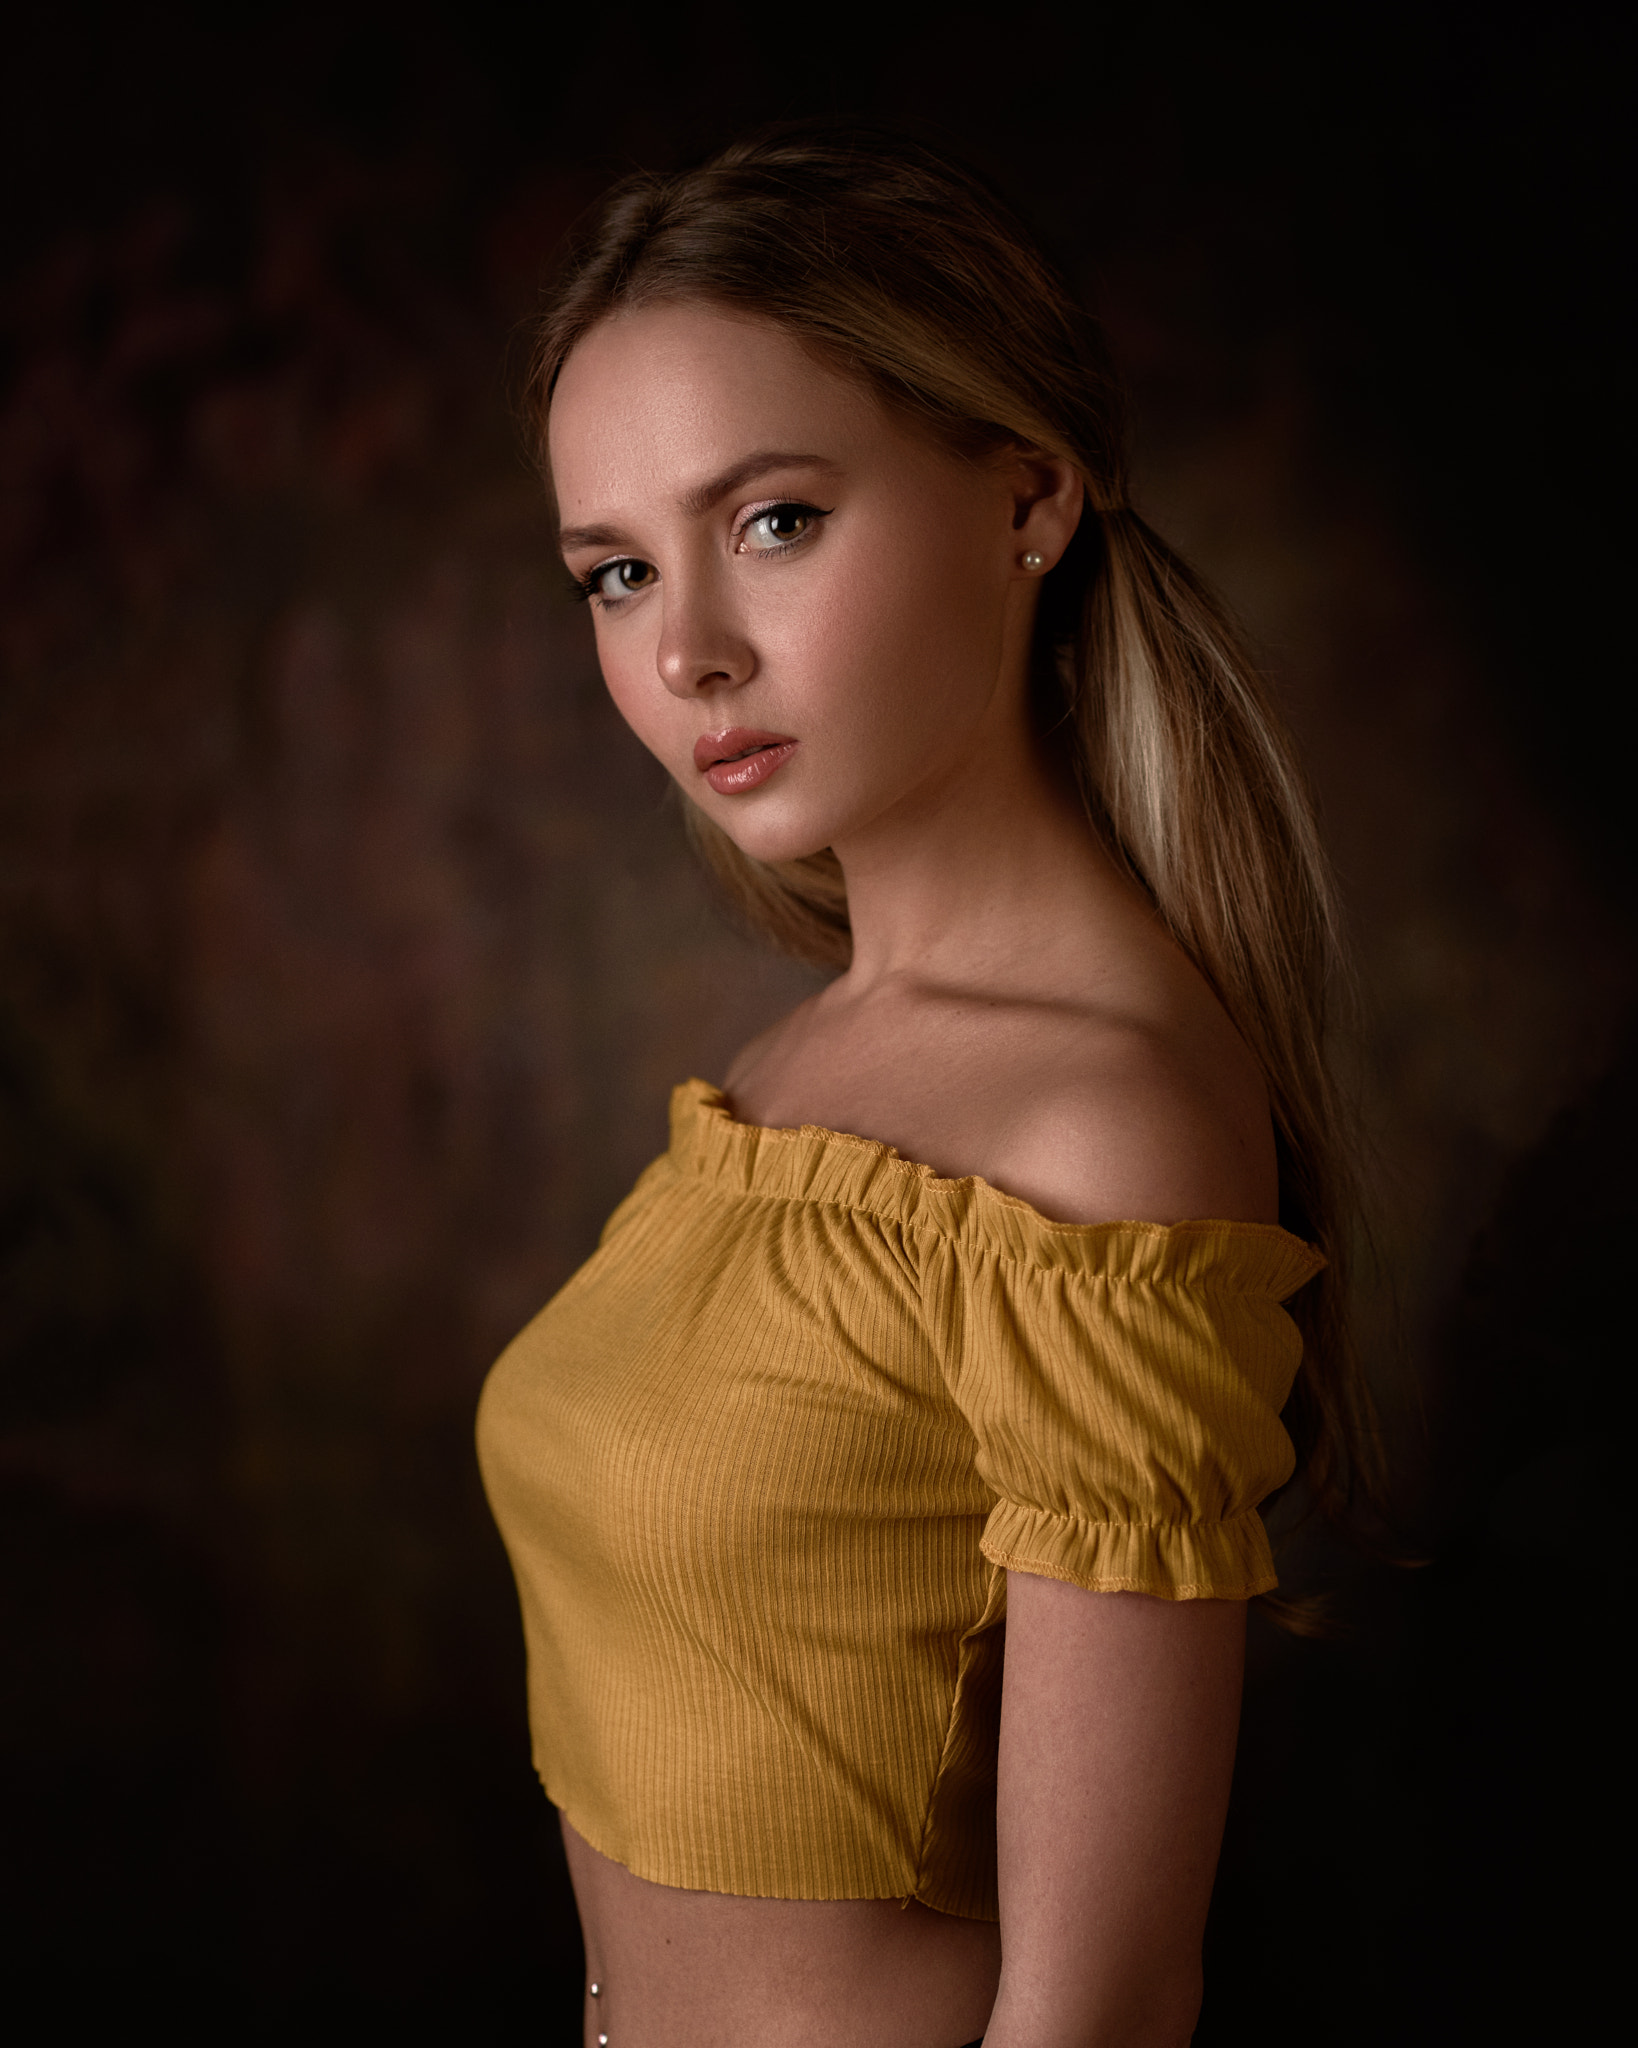 Max Pyzhik Women Blonde Yellow Clothing Bare Shoulders Simple Background 1638x2048